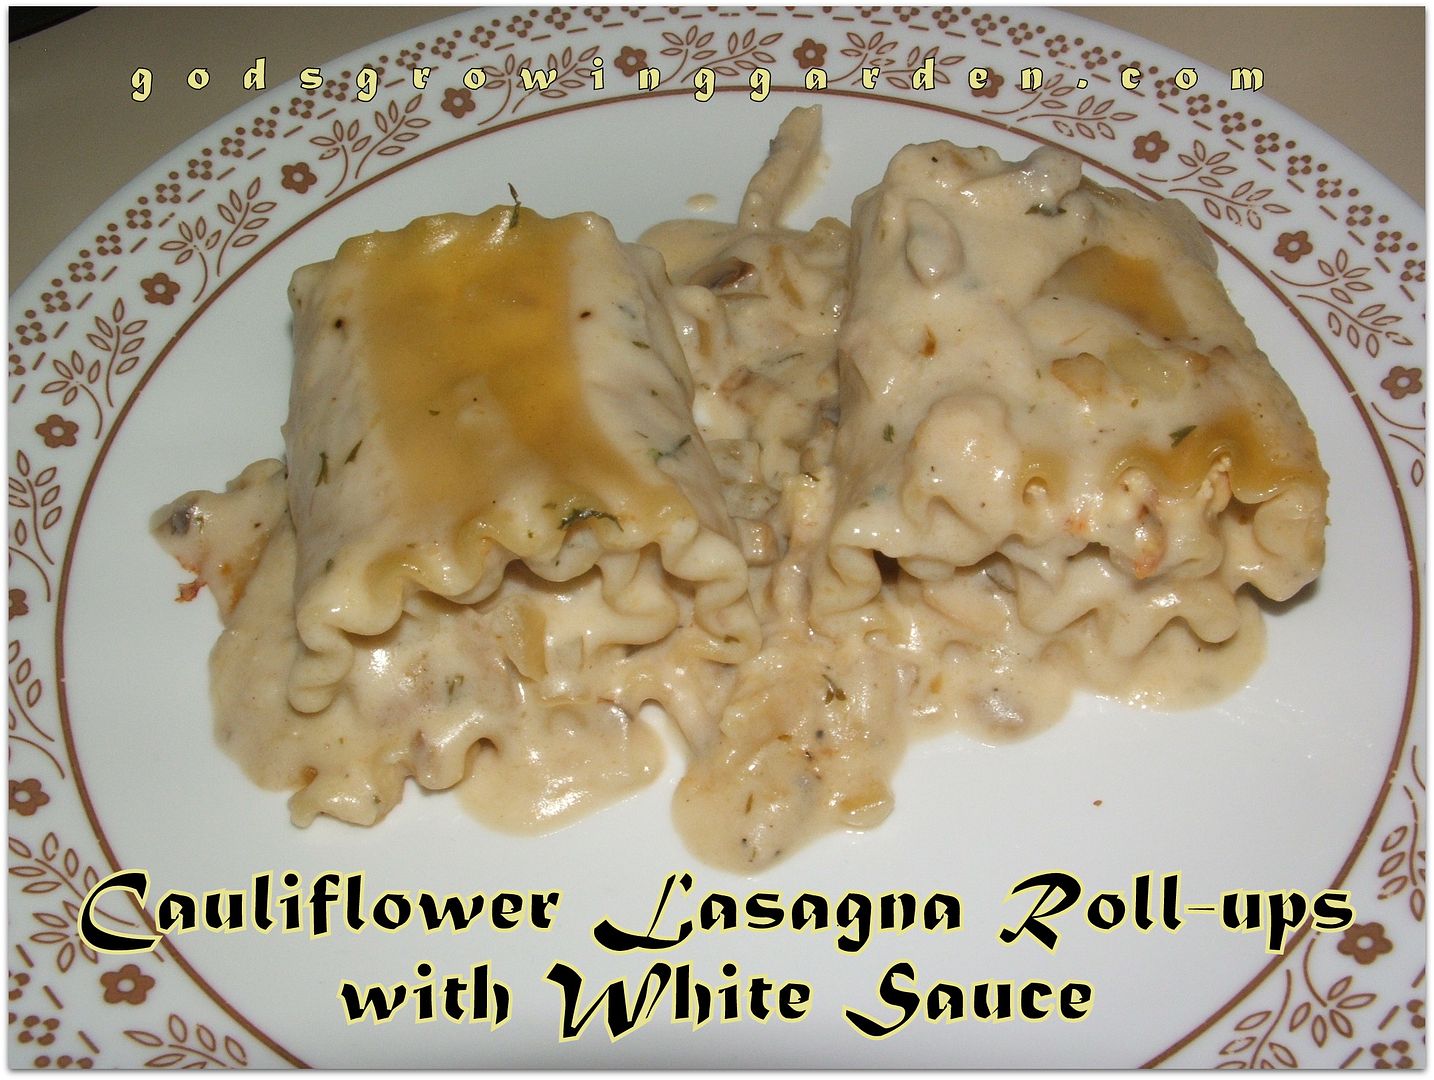 Cauliflower Lasagna Rollups by Angie Ouellette-Tower for godsgrowinggarden.com photo 015_zps32a5c1b3.jpg